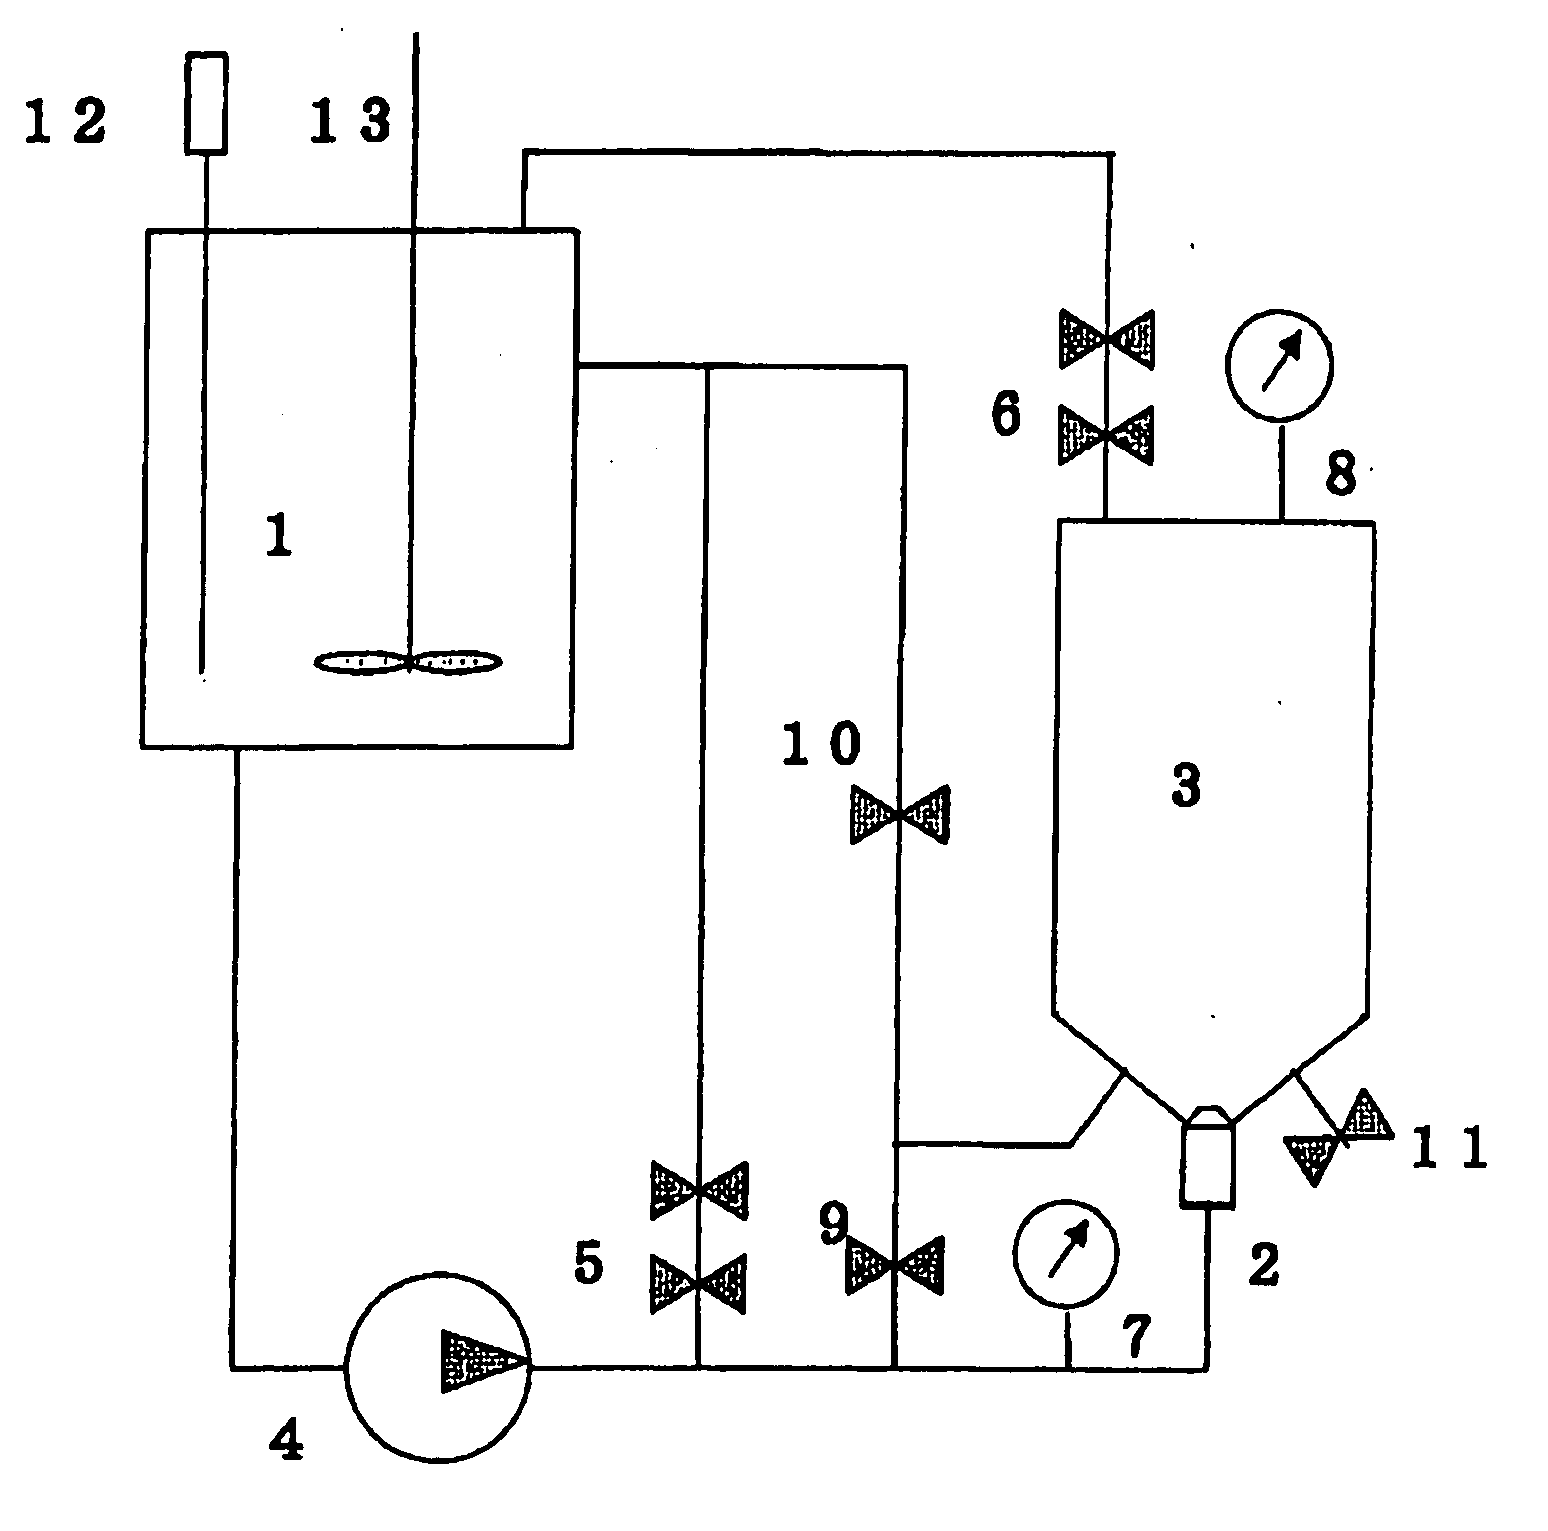 Methods for Beating Pulp, Methods for Treating Process Waters, and Methods for Producing Pulp and Paper